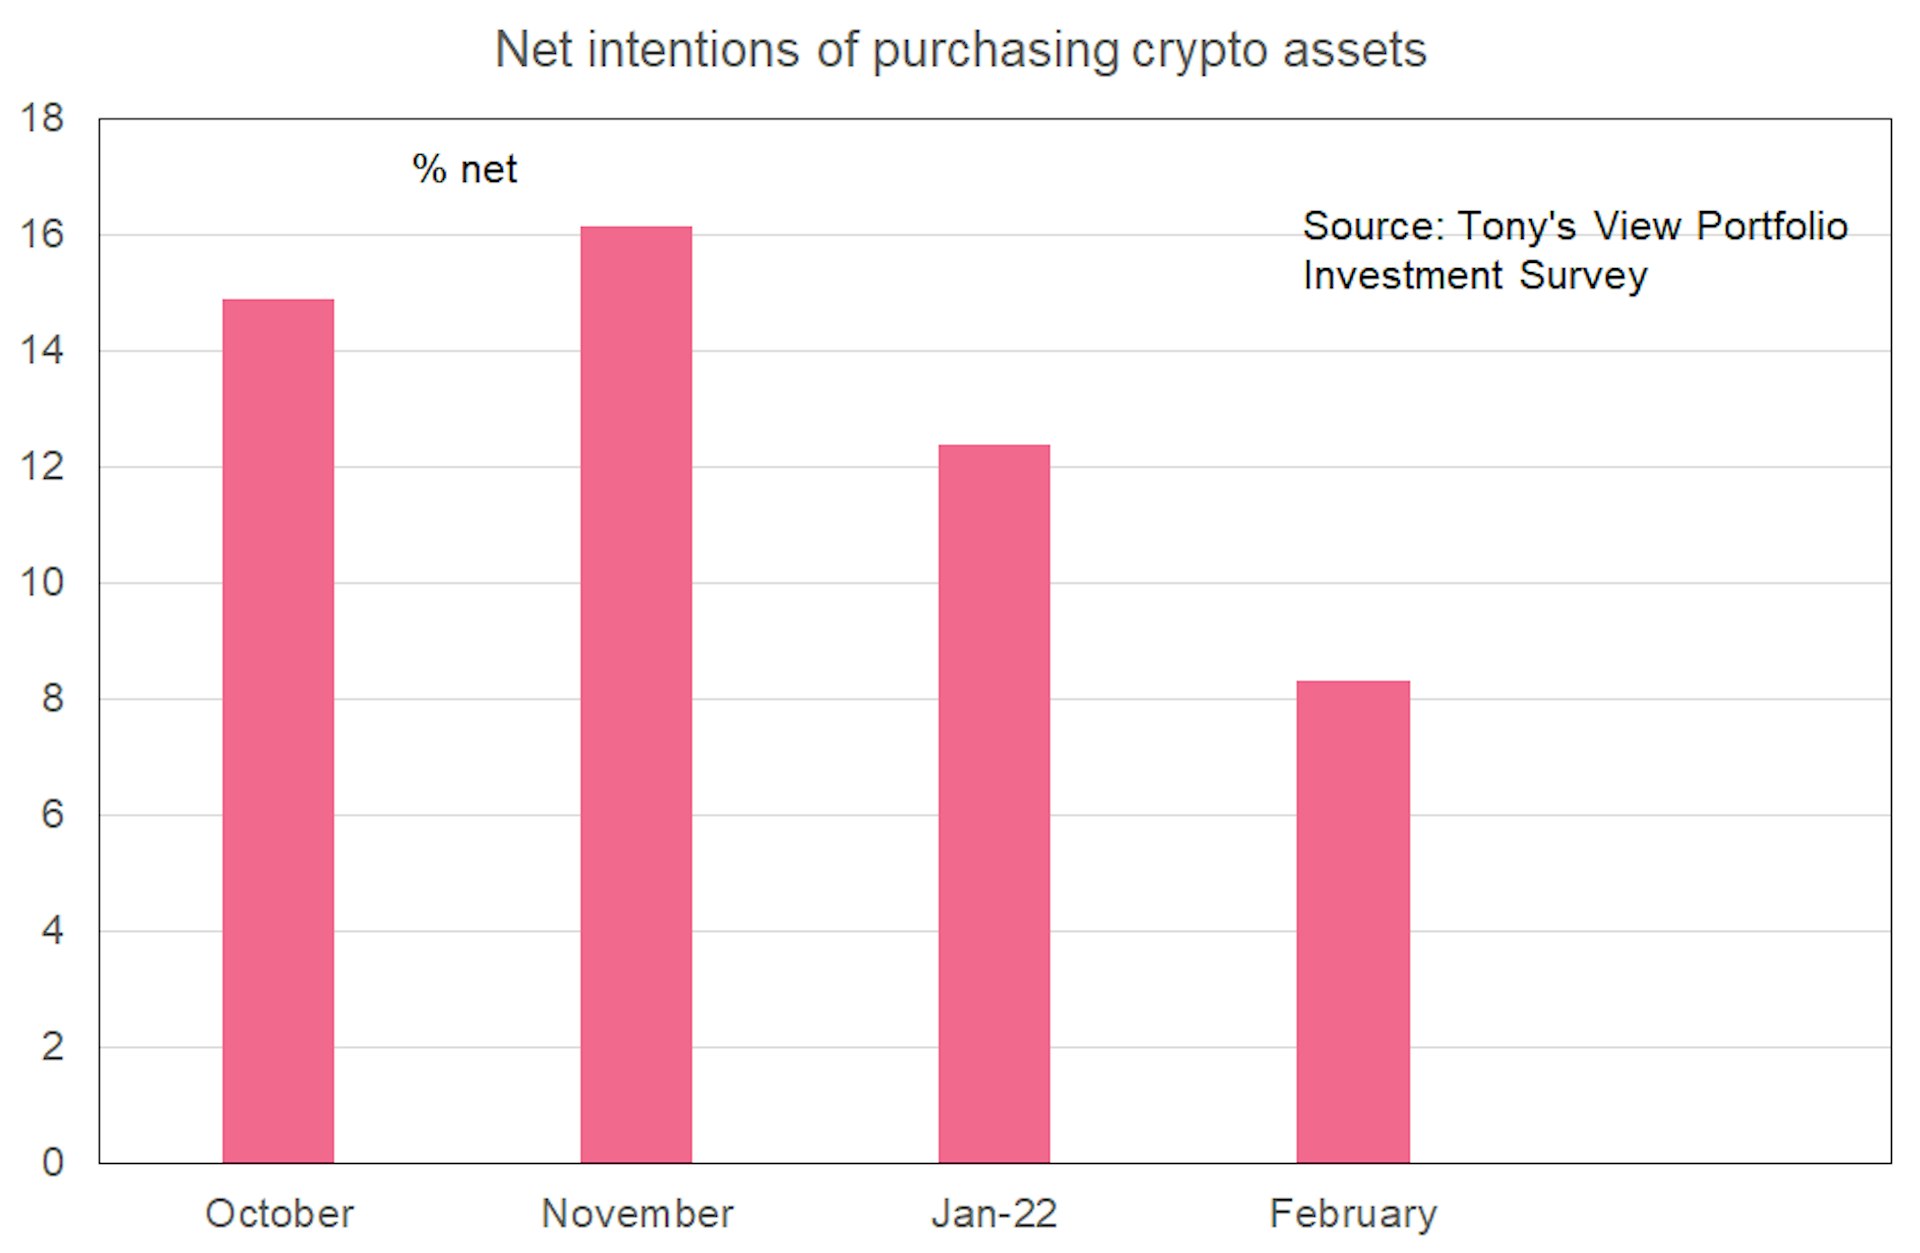 The intention to buy crypto continues to trend down.